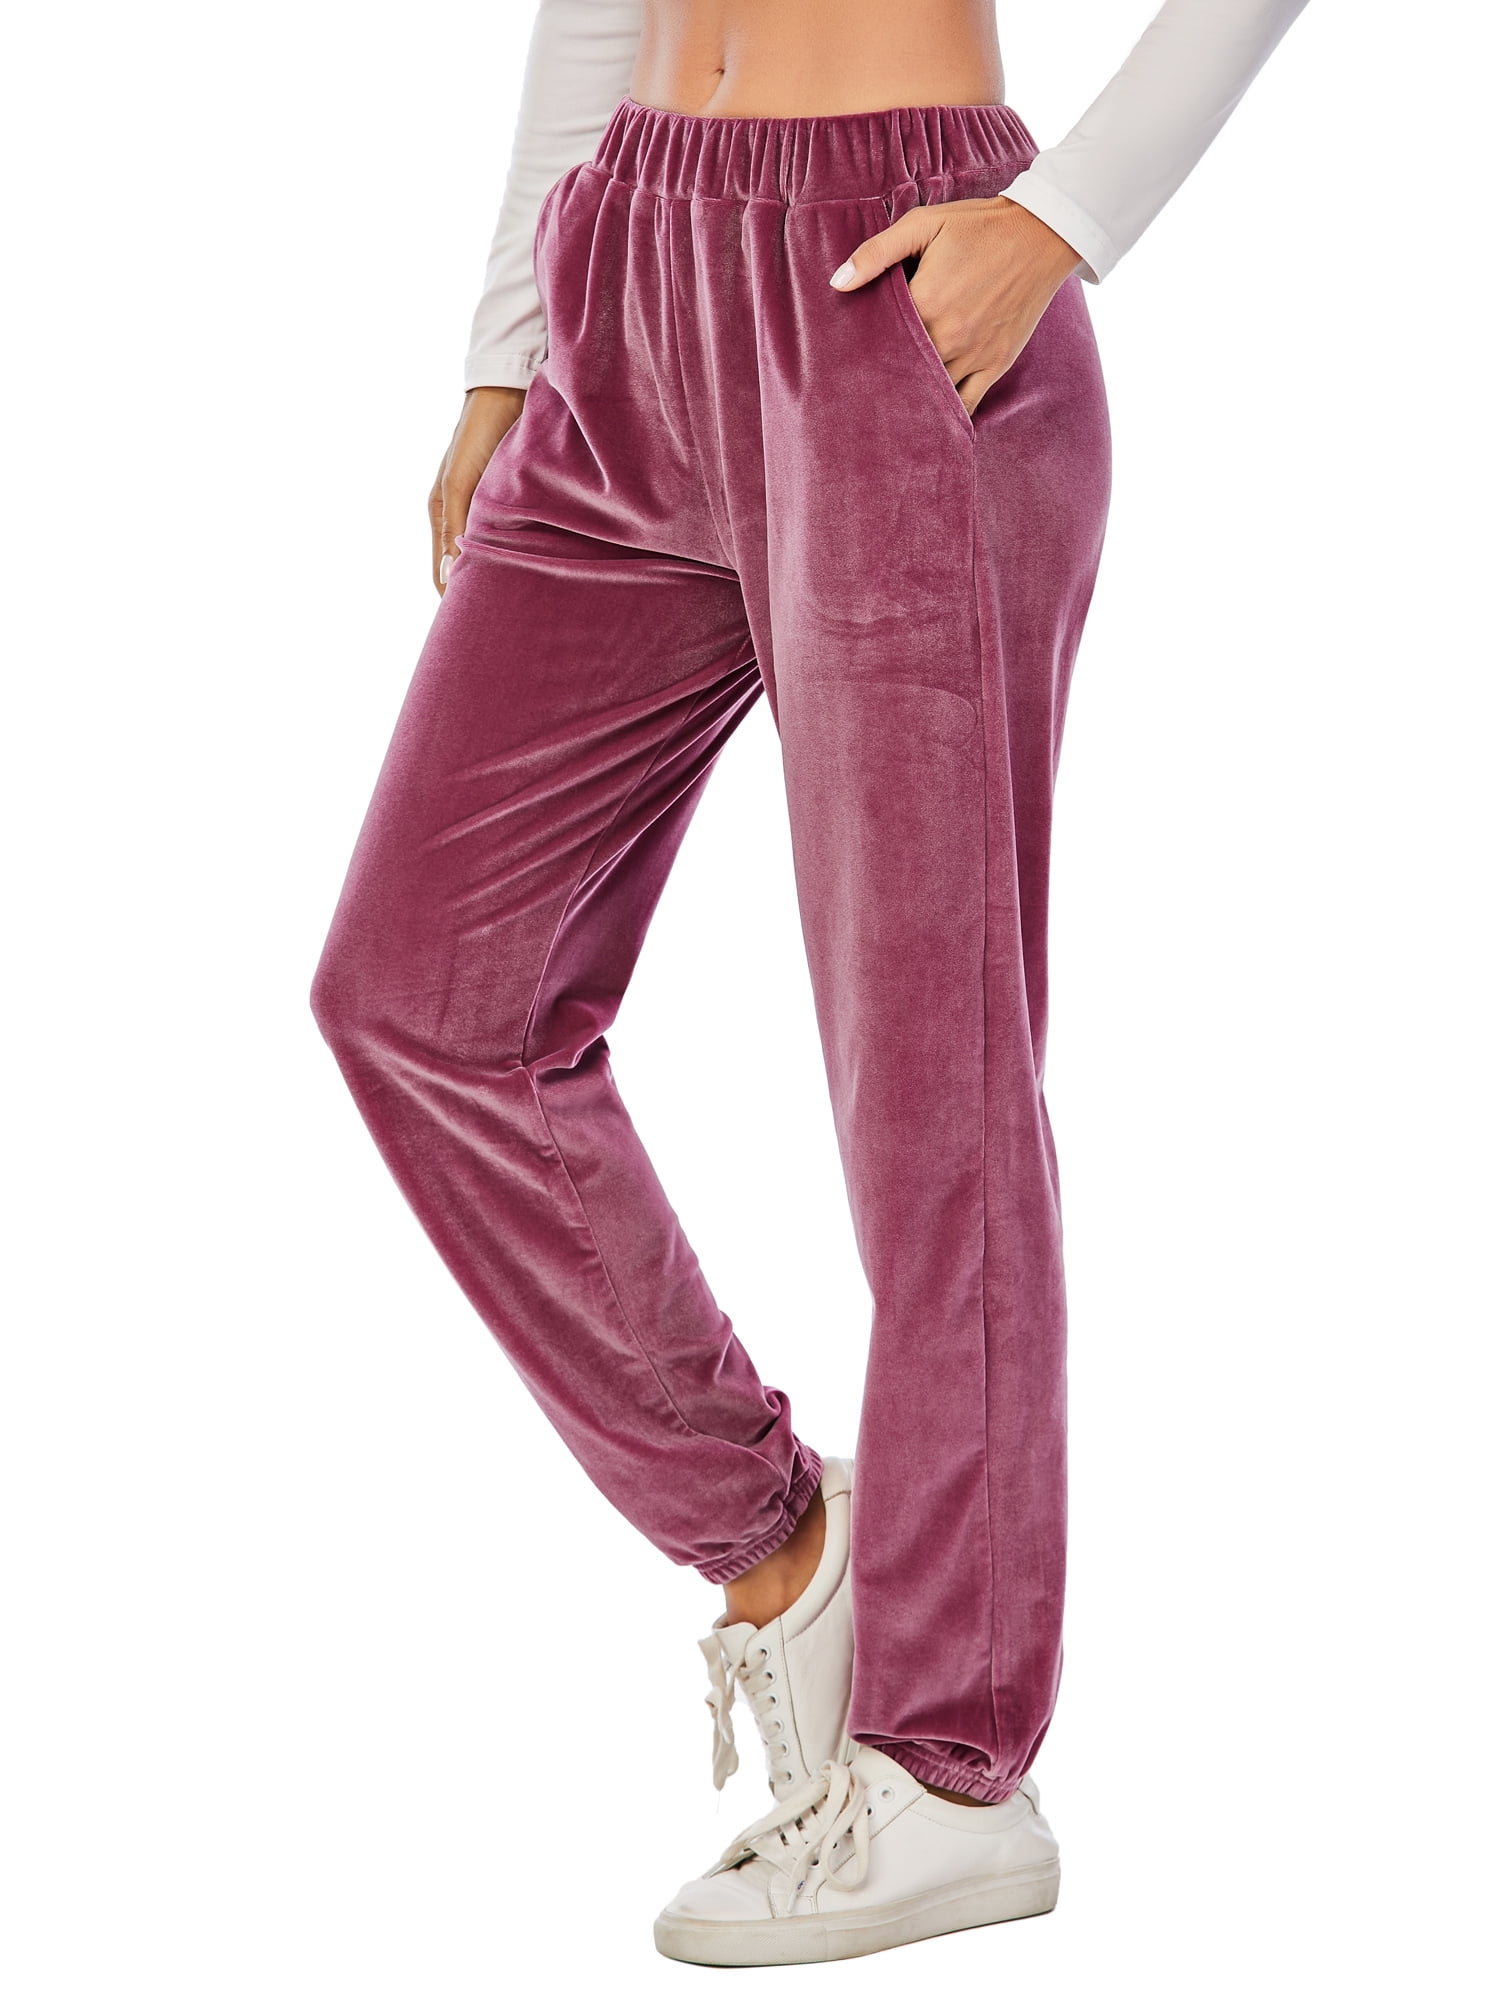 LELINTA Women's Big and Tall Active Yoga Sweatpants Workout Joggers Pants  Lounge Sweat Pants with Pockets, Red/ Purple / Blue/ Pink, S-2XL